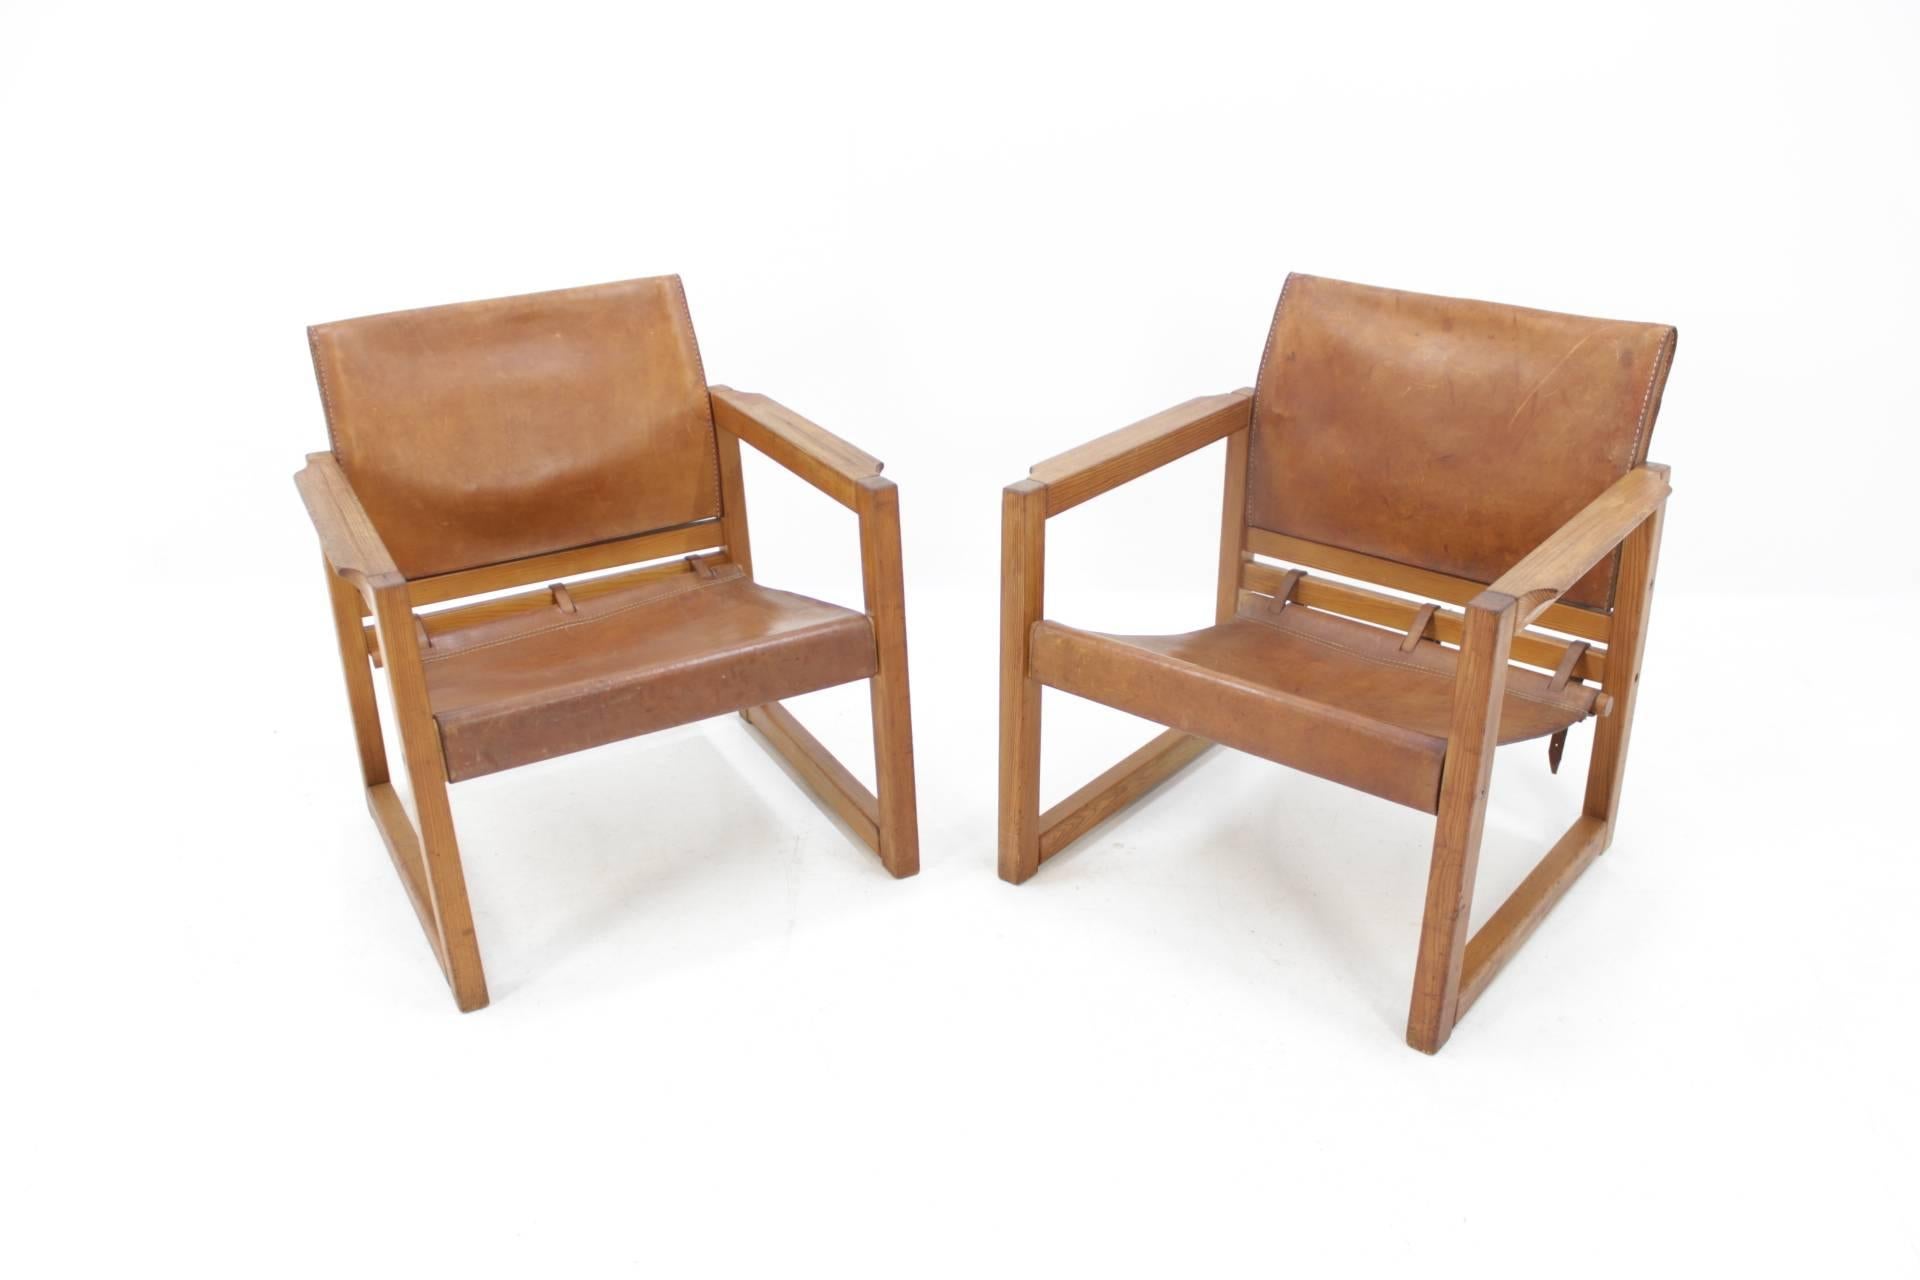 A pair of leather “Safari” chairs designed by the Swedish designer Karin Mobring and produced in the 1970s.